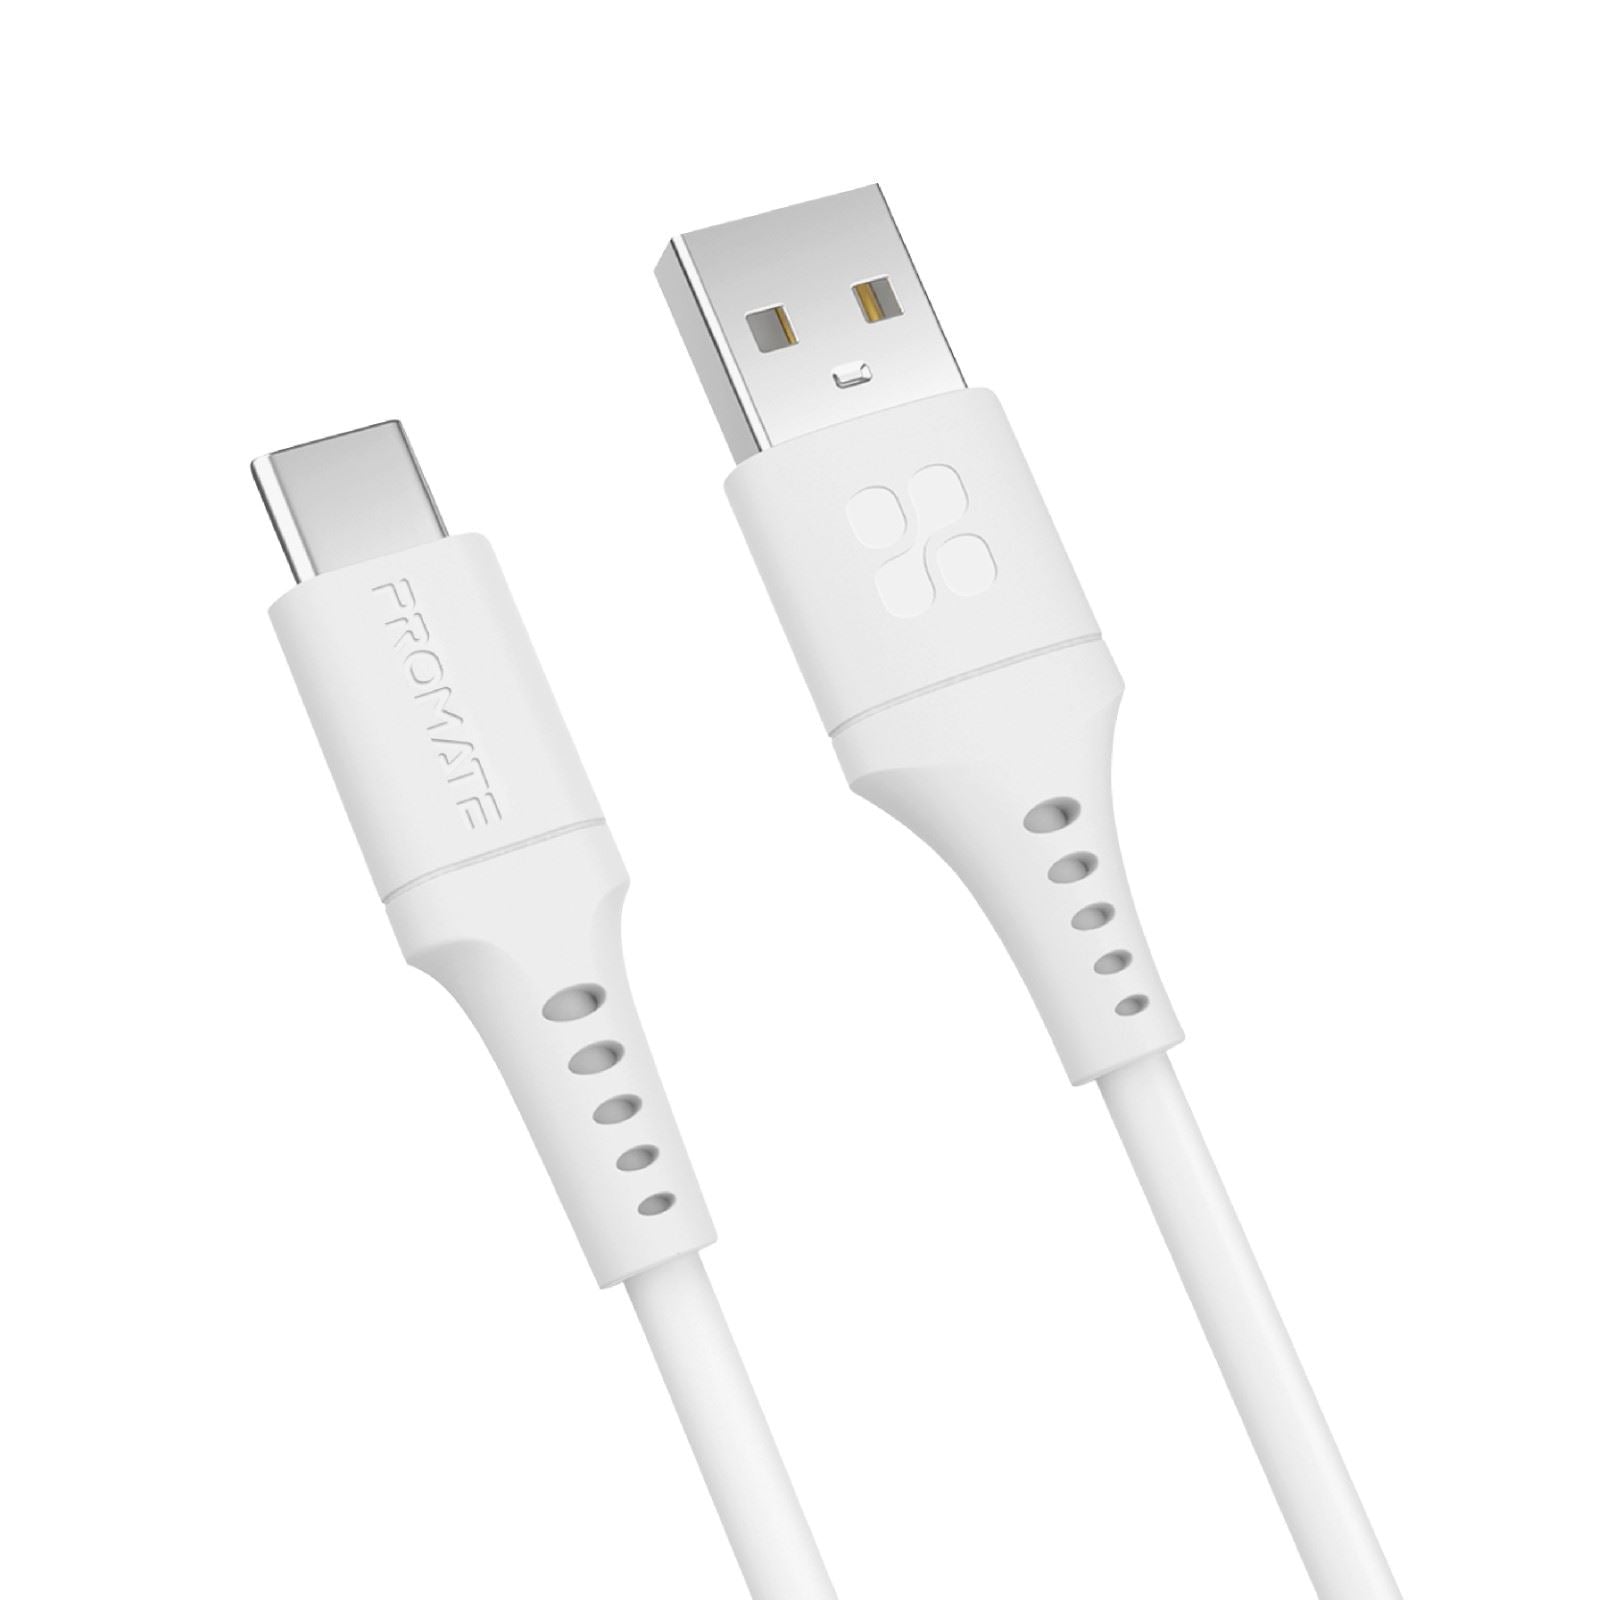 PROMATE_1.2m_USB-A_to_USB-C_Data_&_Charge_Cable._Data_Transfer_Rate_480Mbps._Total_Current_3A._Durable_Soft_Silcon_Cable._Tangle_Resistant_25000+_Bend_Tested._White 1639